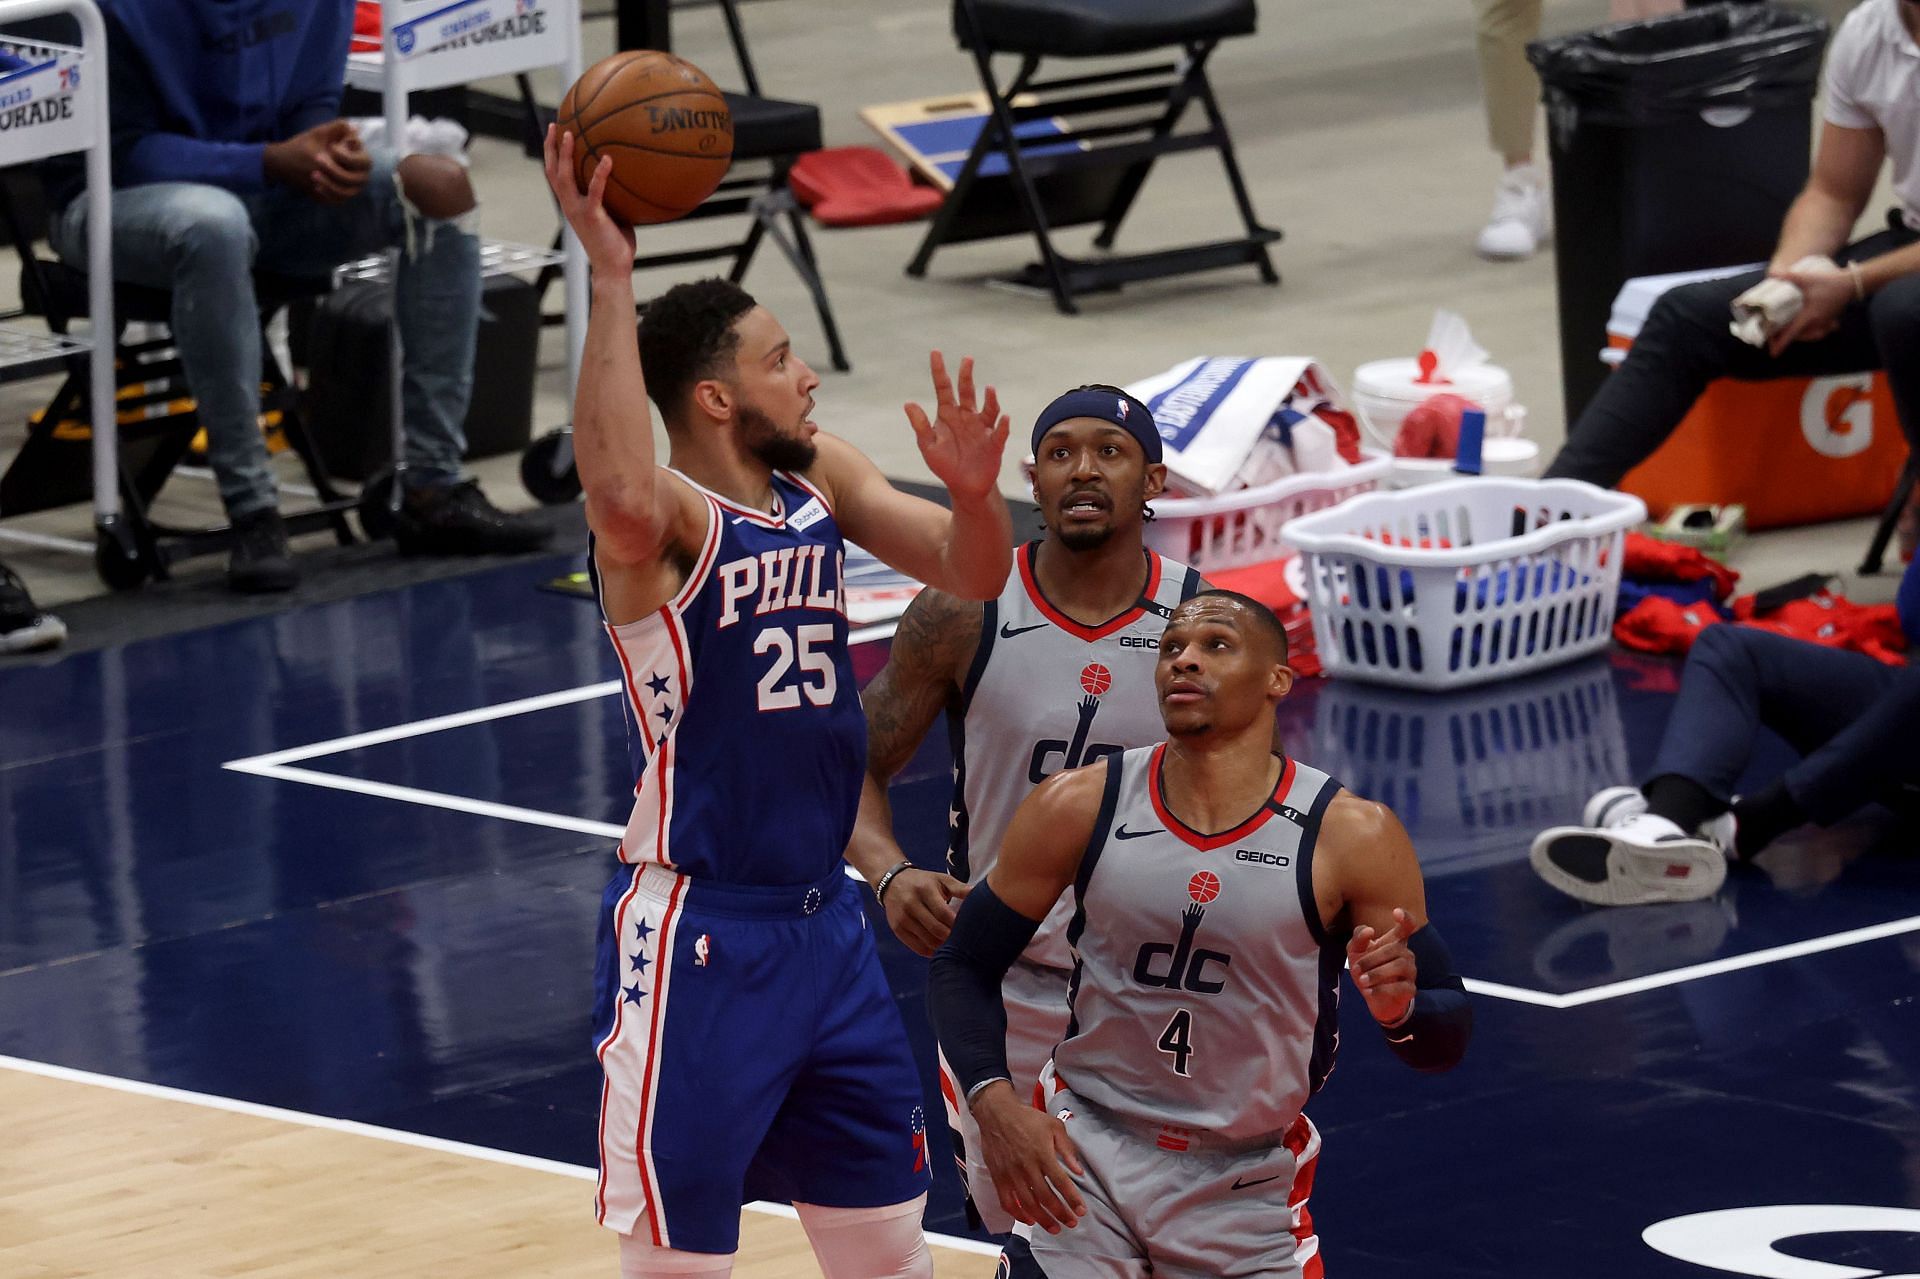 Philadelphia 76ers faced off against the Washington Wizards in the NBA Playoffs last season.